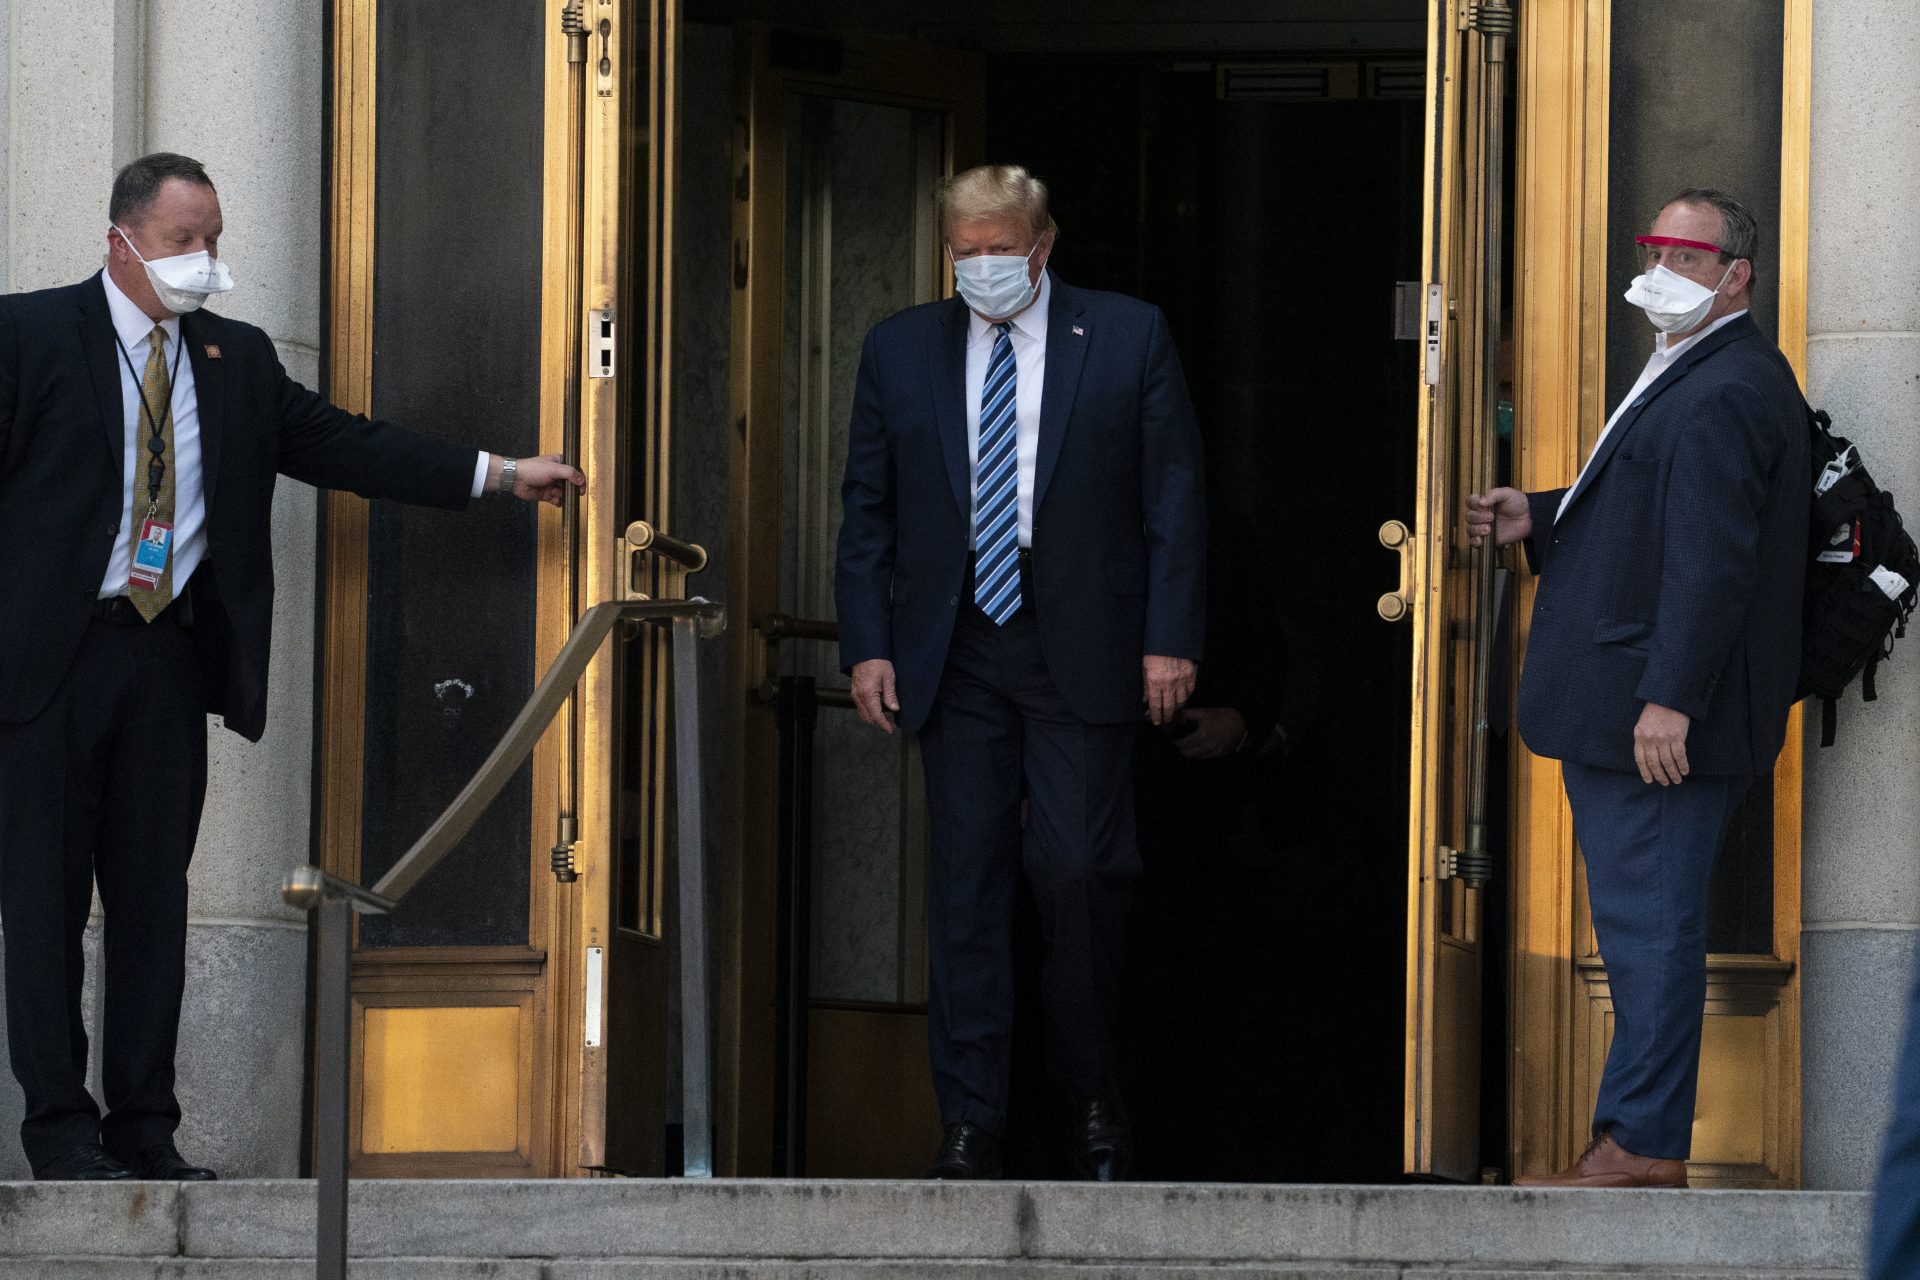 President Donald Trump walks out of Walter Reed National Military Medical Center after receiving treatment as a covid-19 patient, Monday, Oct. 5, 2020, in Bethesda, Md.